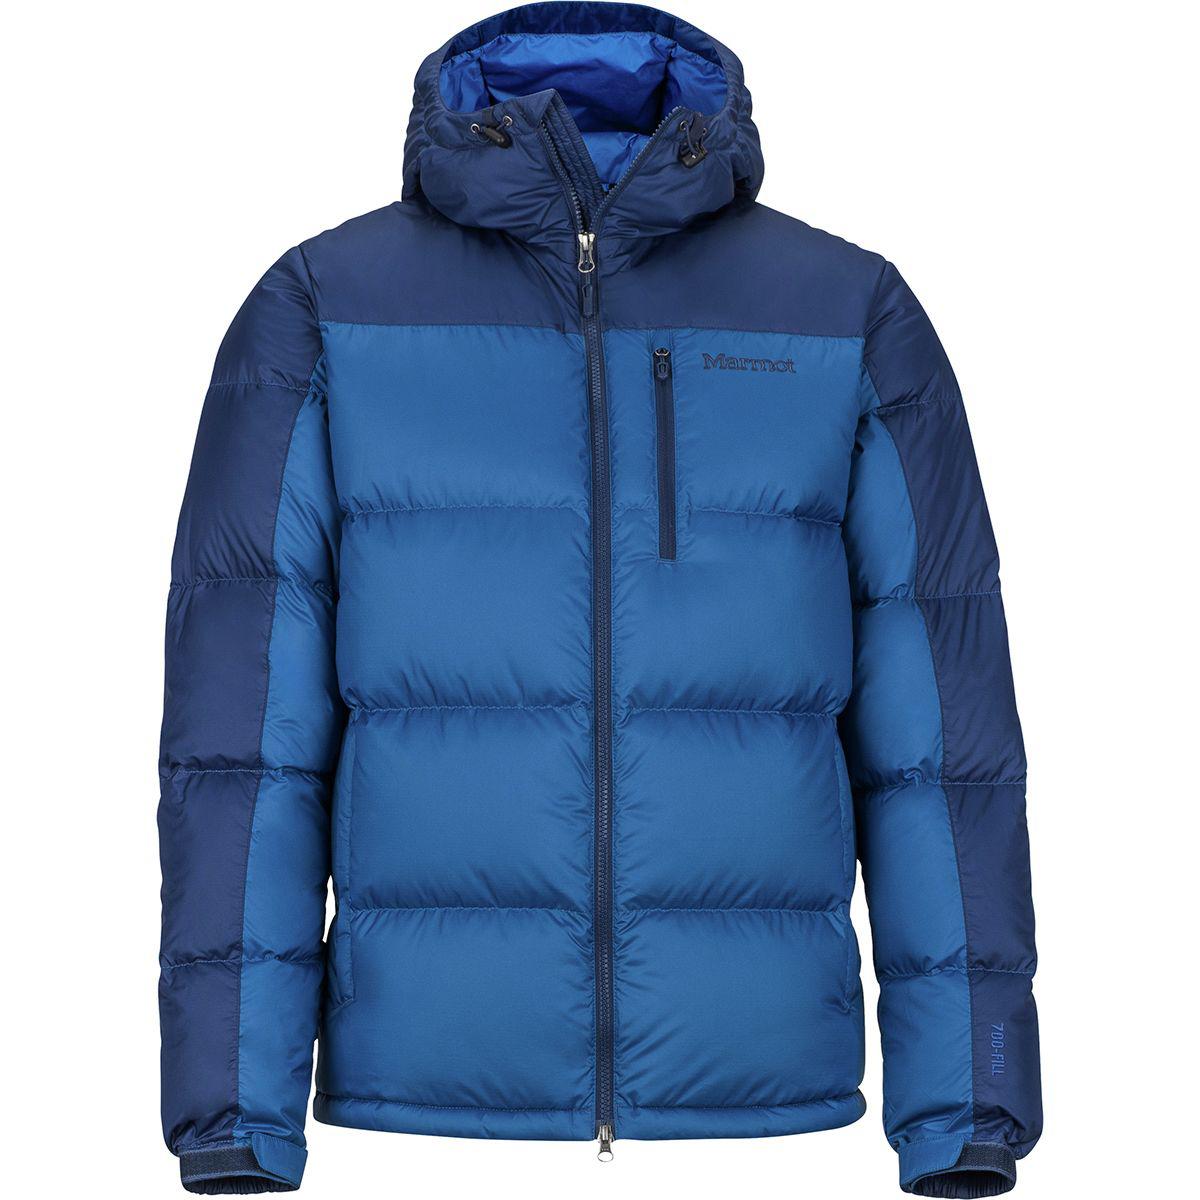 Marmot Synthetic Guides Down Hooded Jacket in Blue for Men - Lyst